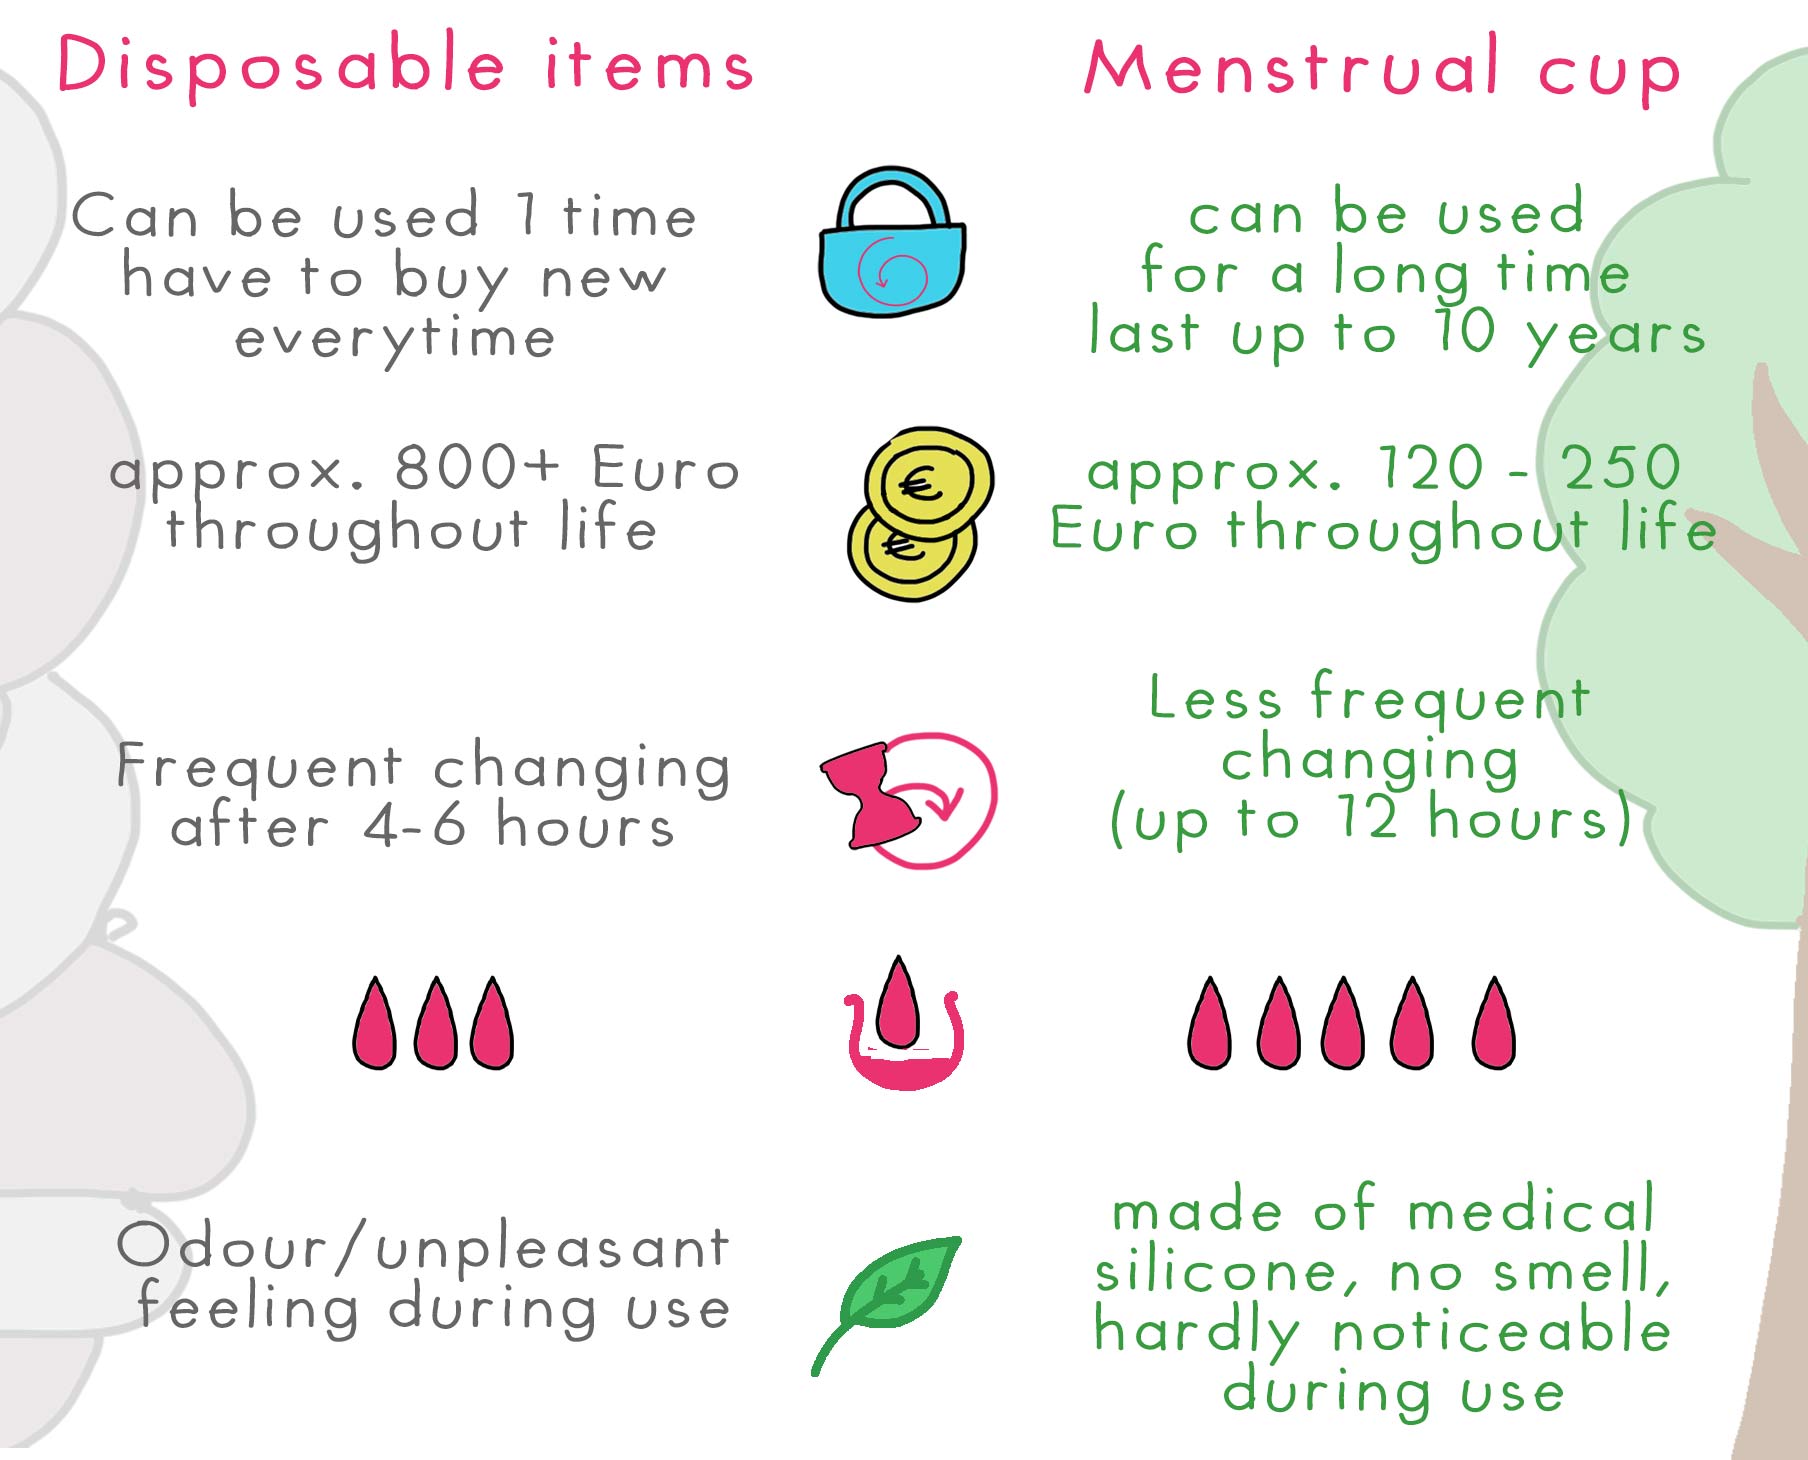 Disposable items can be used 1 time, have to buy new everytime, approx. 800+ Euro throughout life, frequent changing after 4-6 hours, odour/ unpleasant feeling during use. Menstrual cup can be used for a long time, last up to 10 years, approx. 120 - 250 E